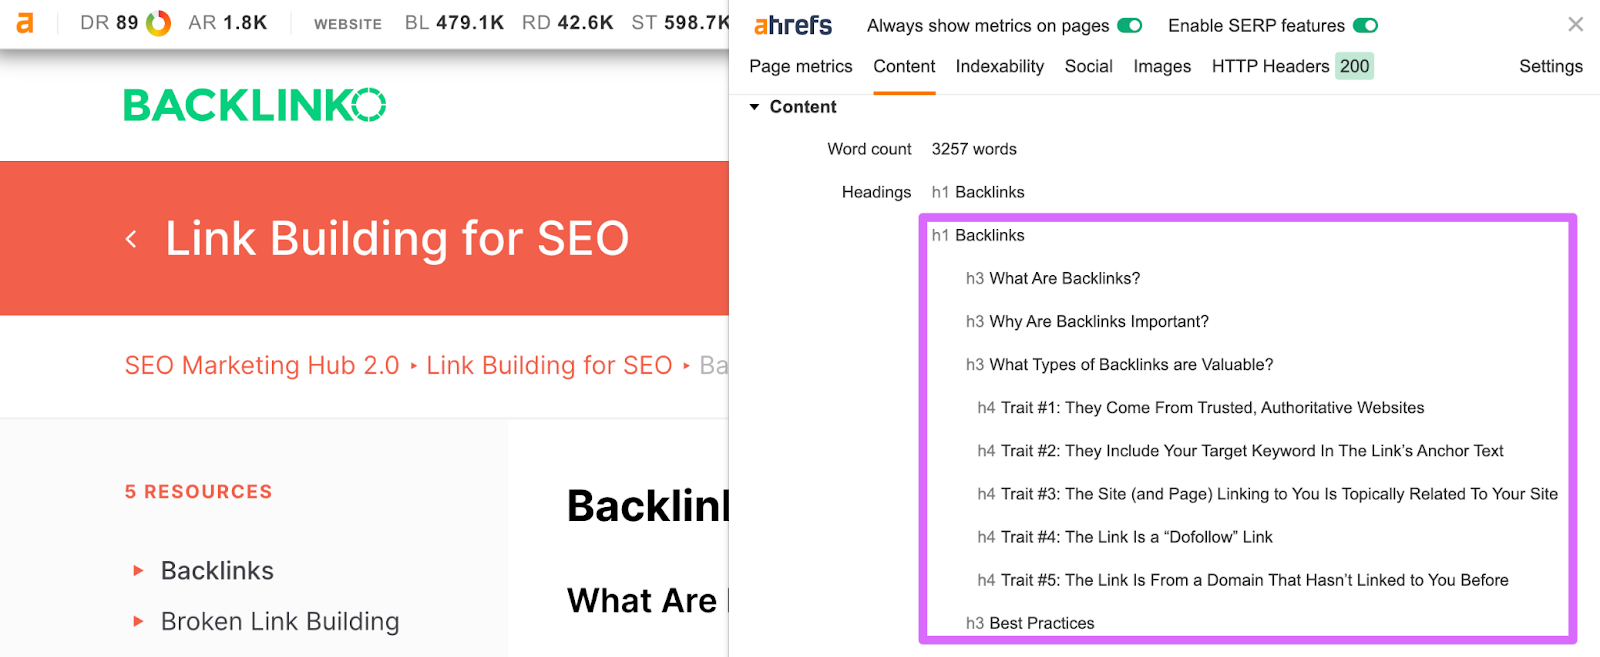 ahrefs chrome extension showing outline of blog post by header and h3 subheadings